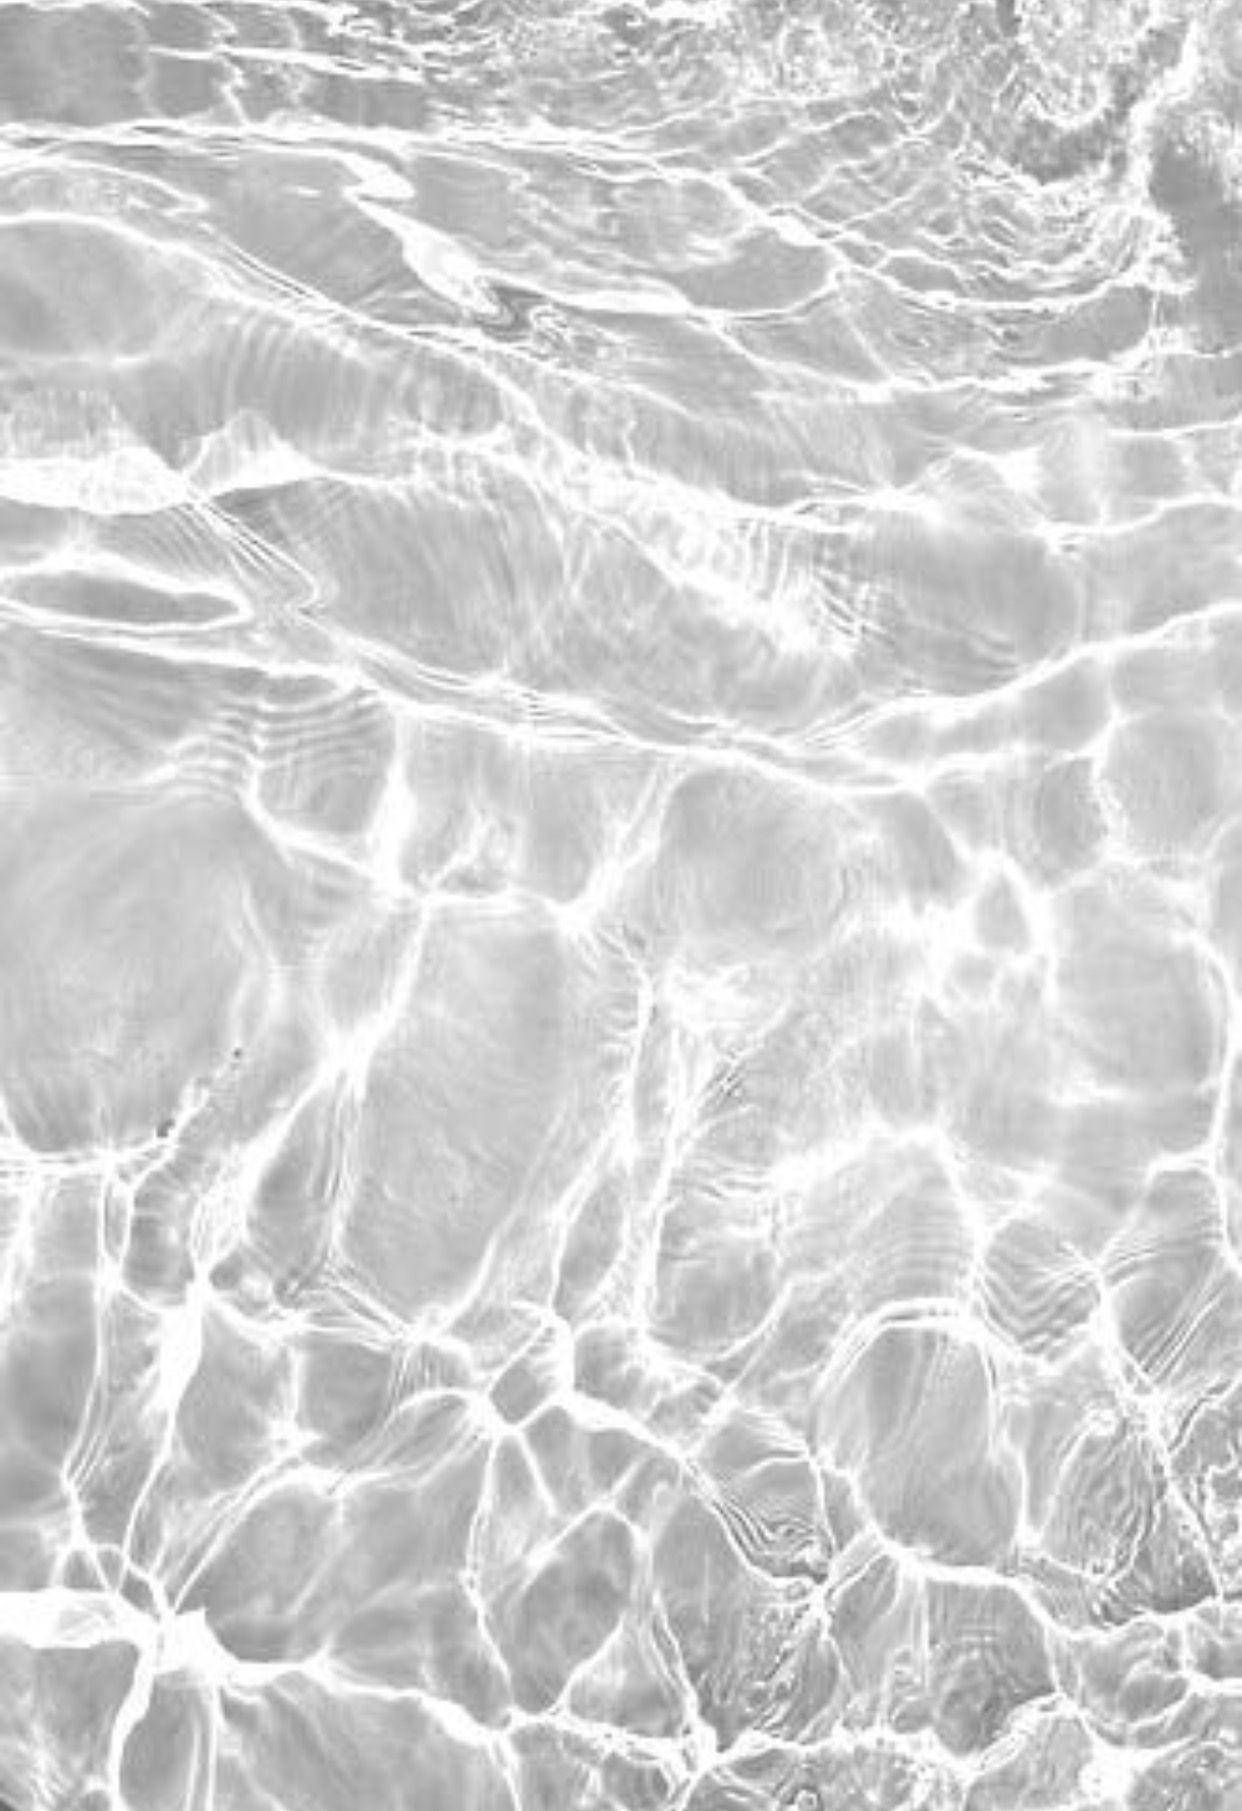 A Black And White Photo Of Water In The Ocean